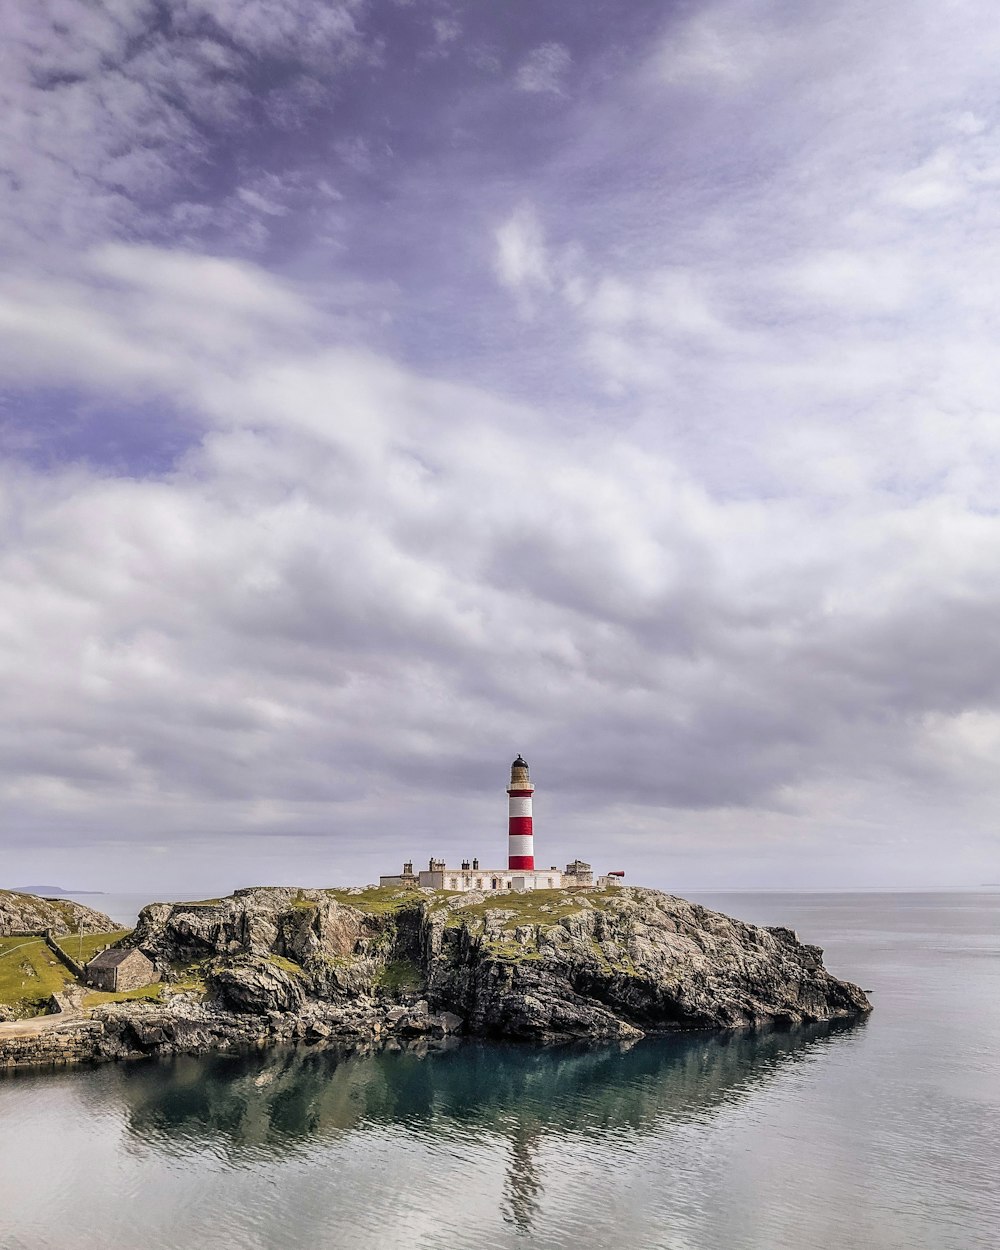 white and red lighthouse on brown rock formation near body of water under cloudy sky during